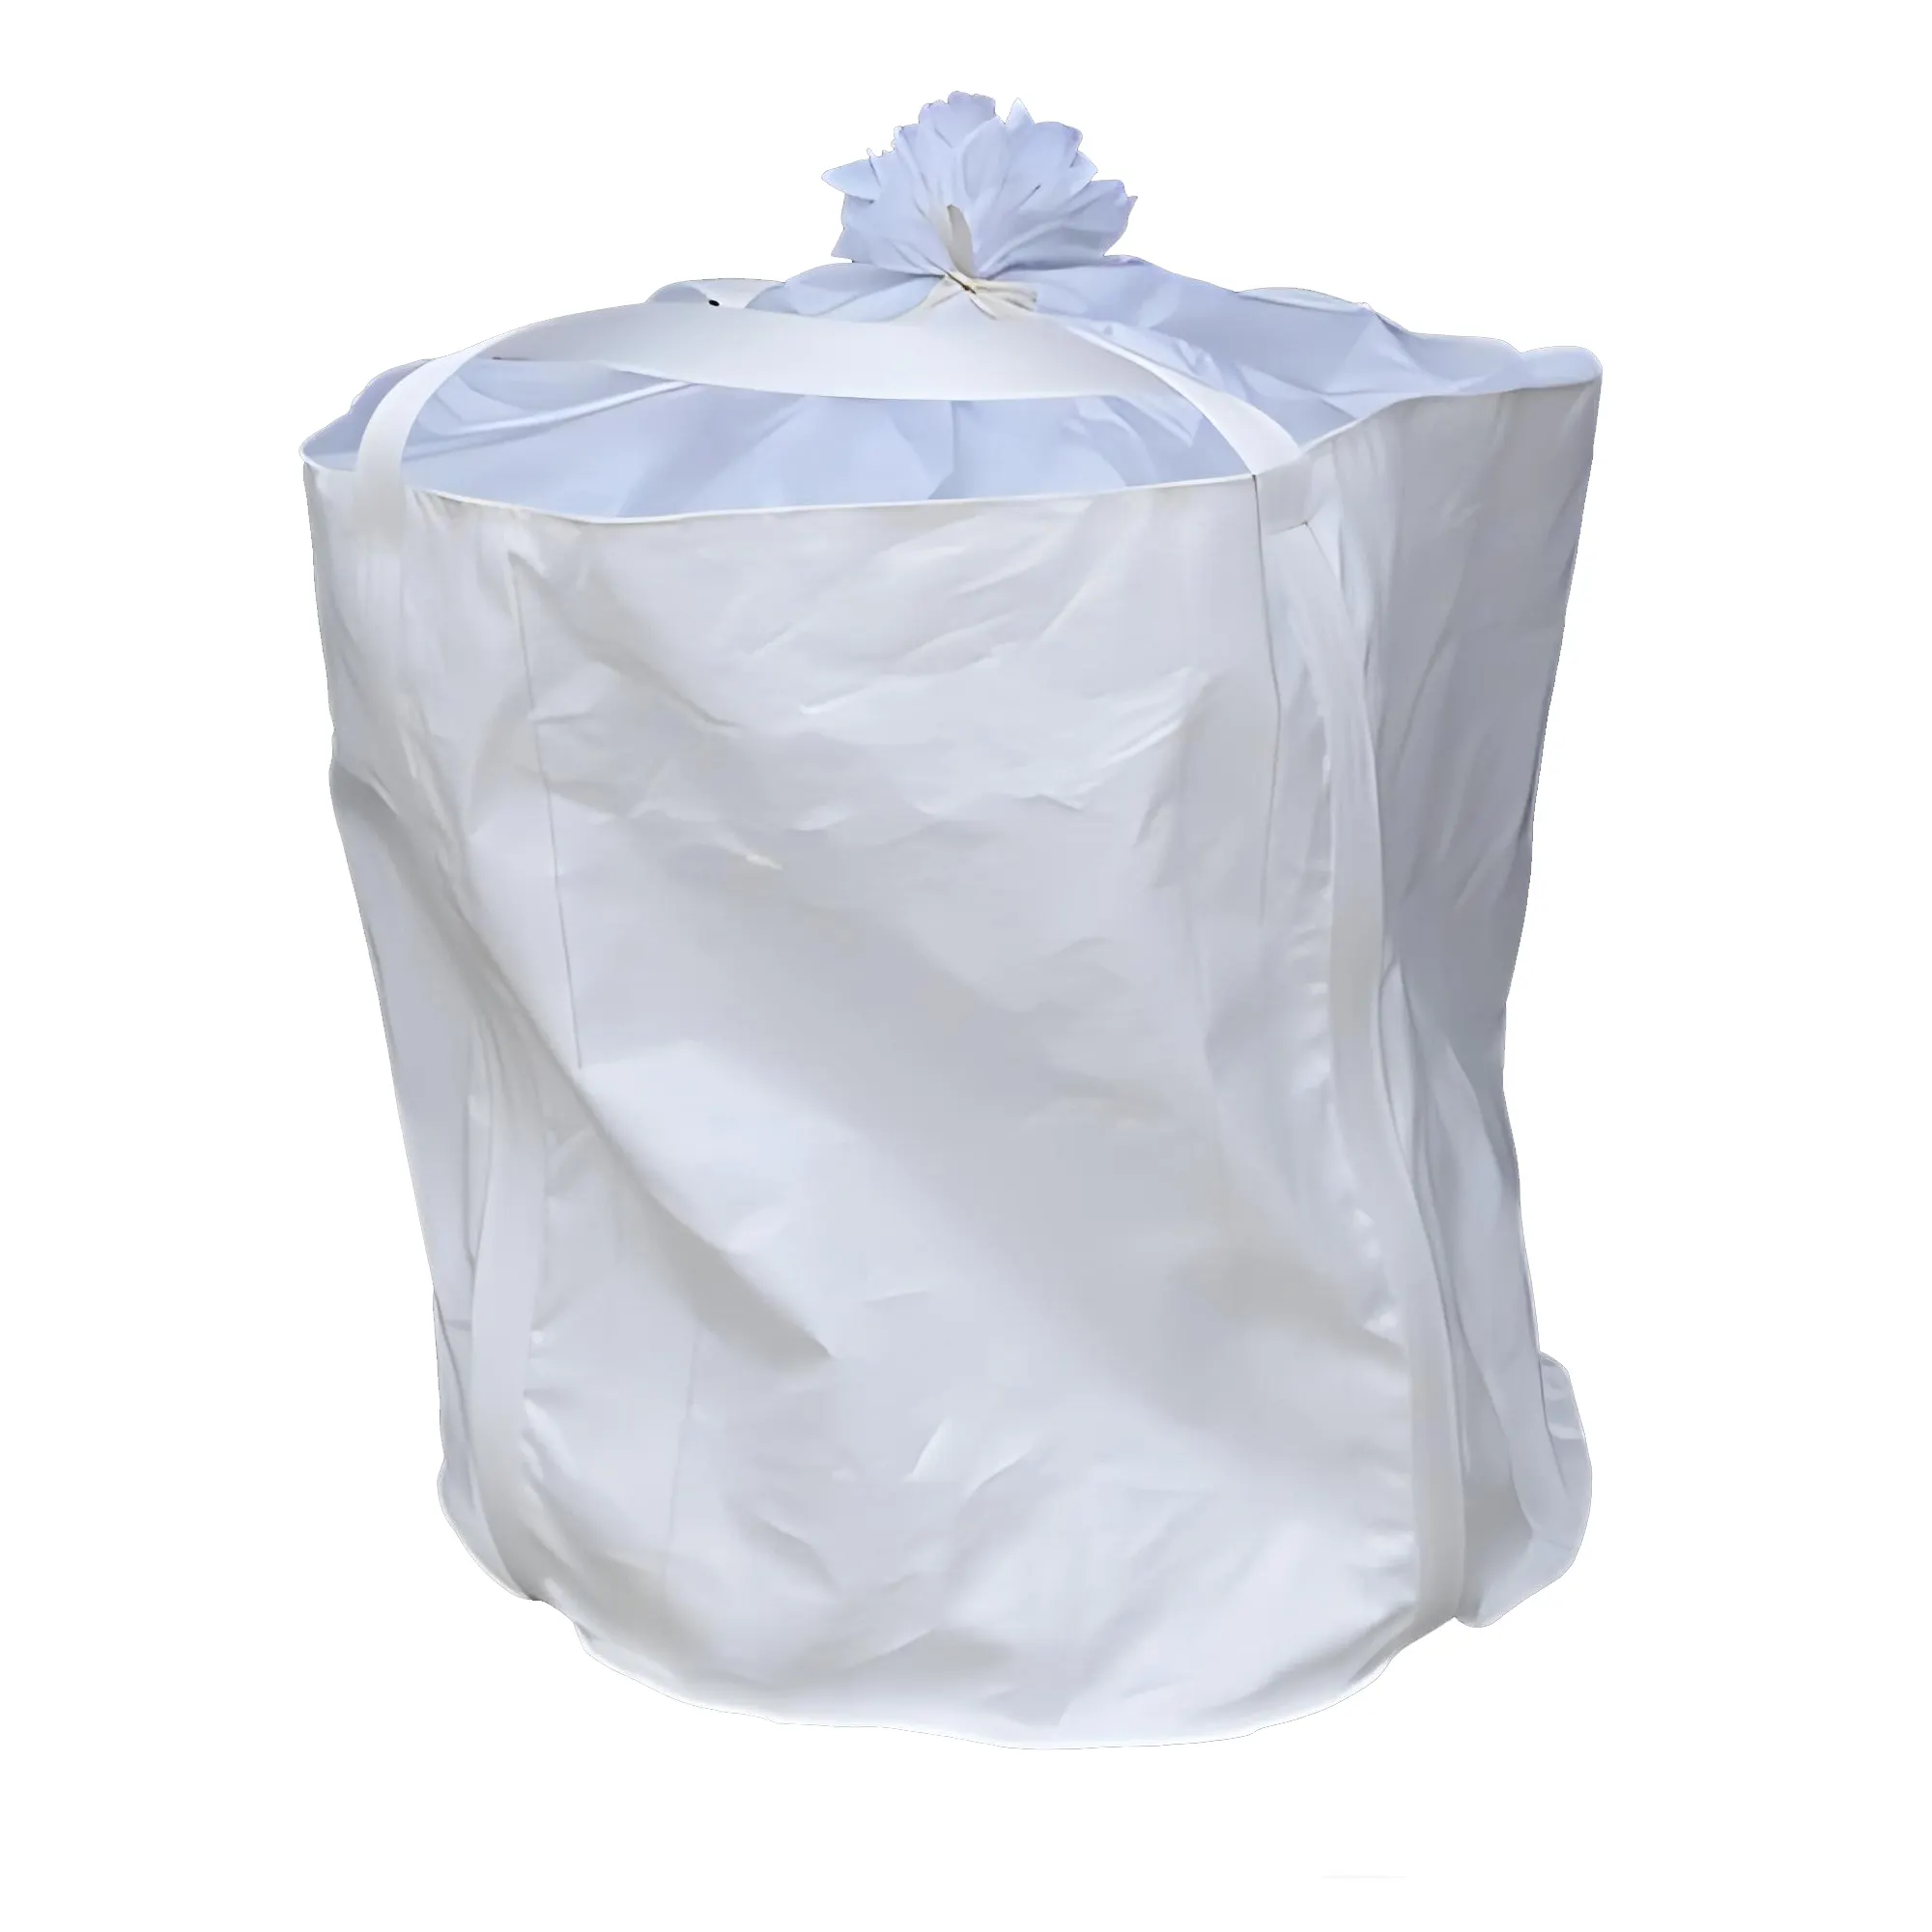 Manufacturers direct sales of white four-ring ton bags, logistics bags, bearing 1t-1.5t ultra-durable container bags